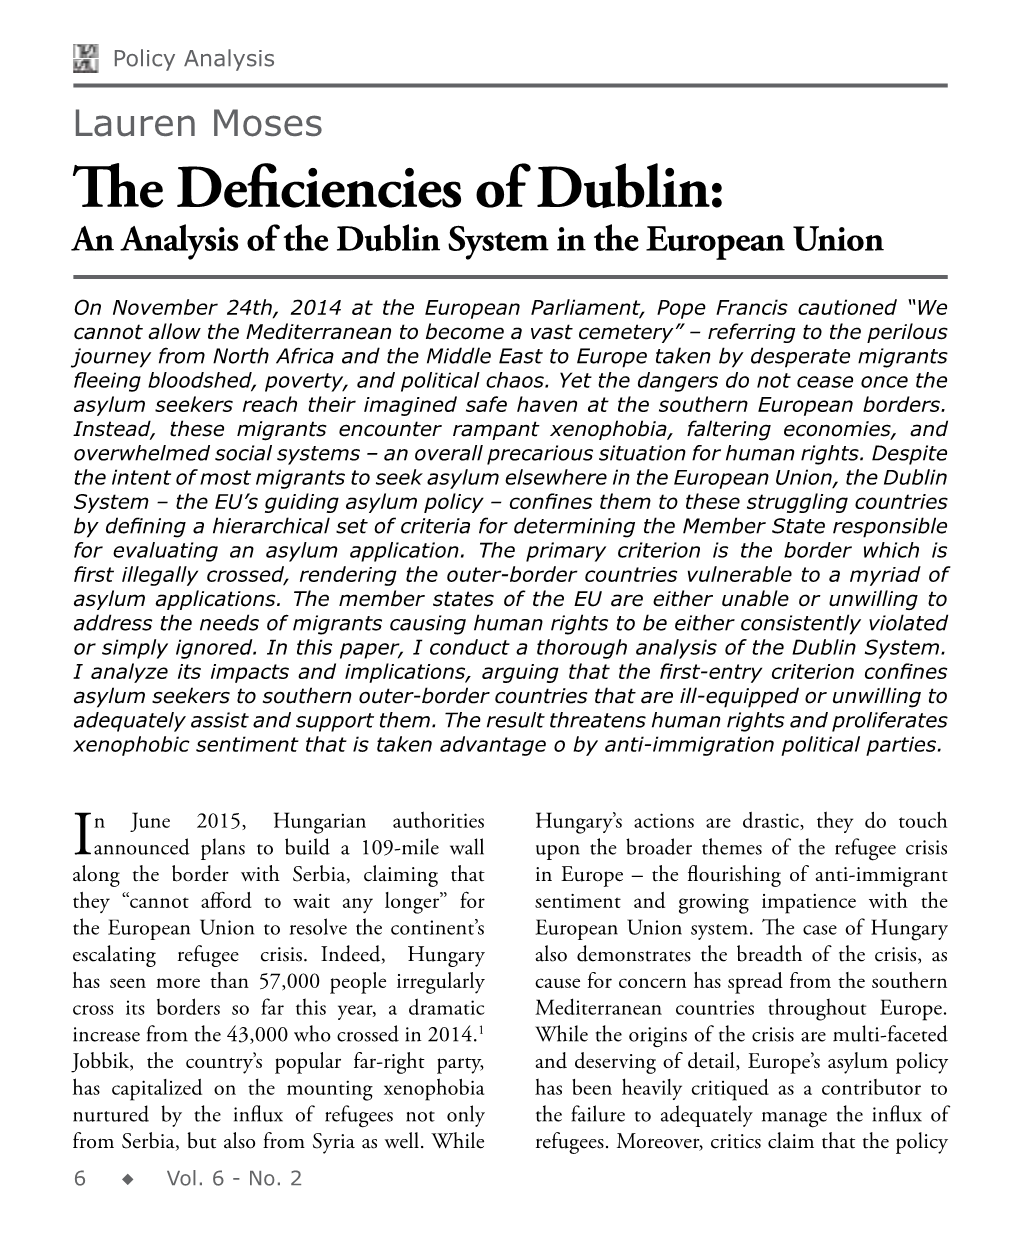 The Deficiencies of Dublin: an Analysis of the Dublin System in the European Union